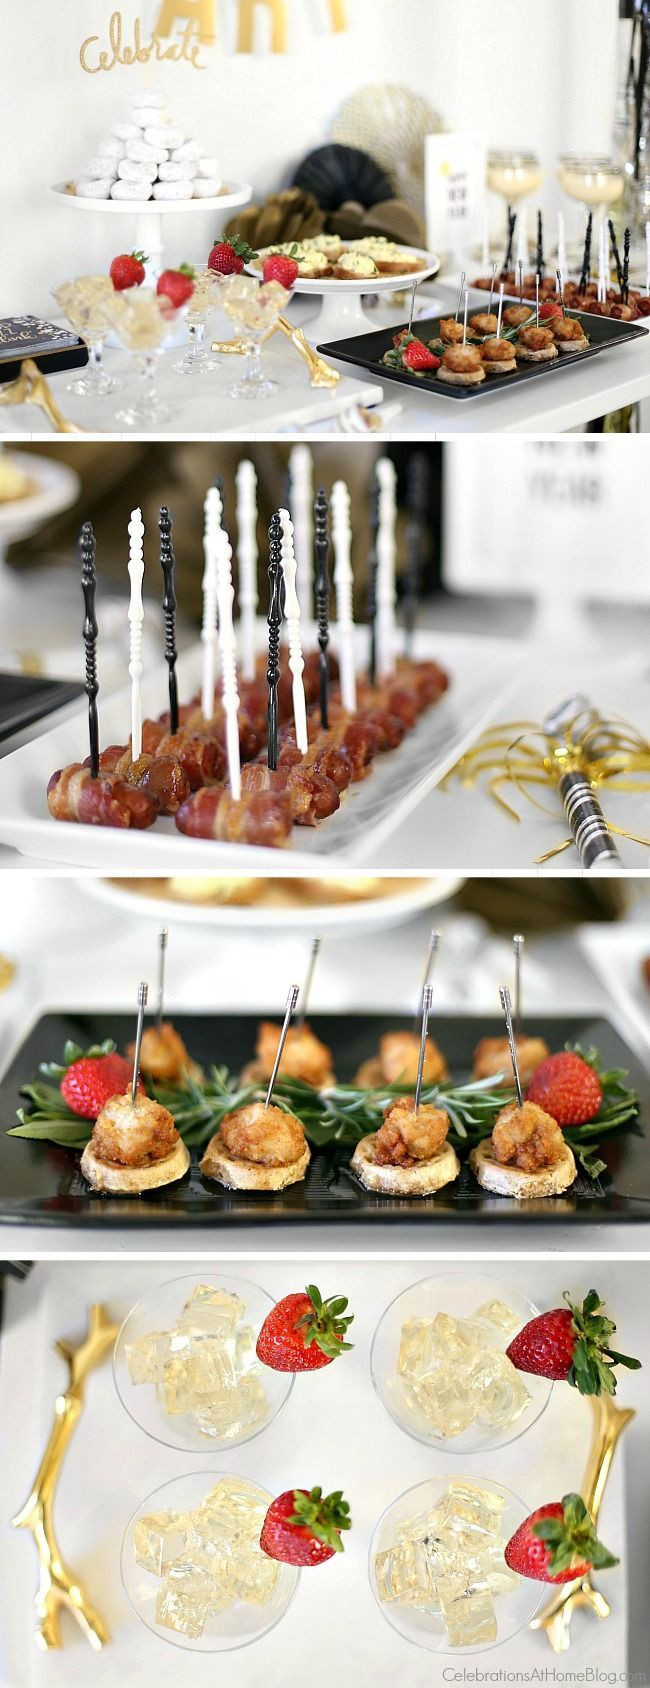 New Year'S Eve Dinner Party Menu Ideas
 Late Night Party Buffet for New Years Eve